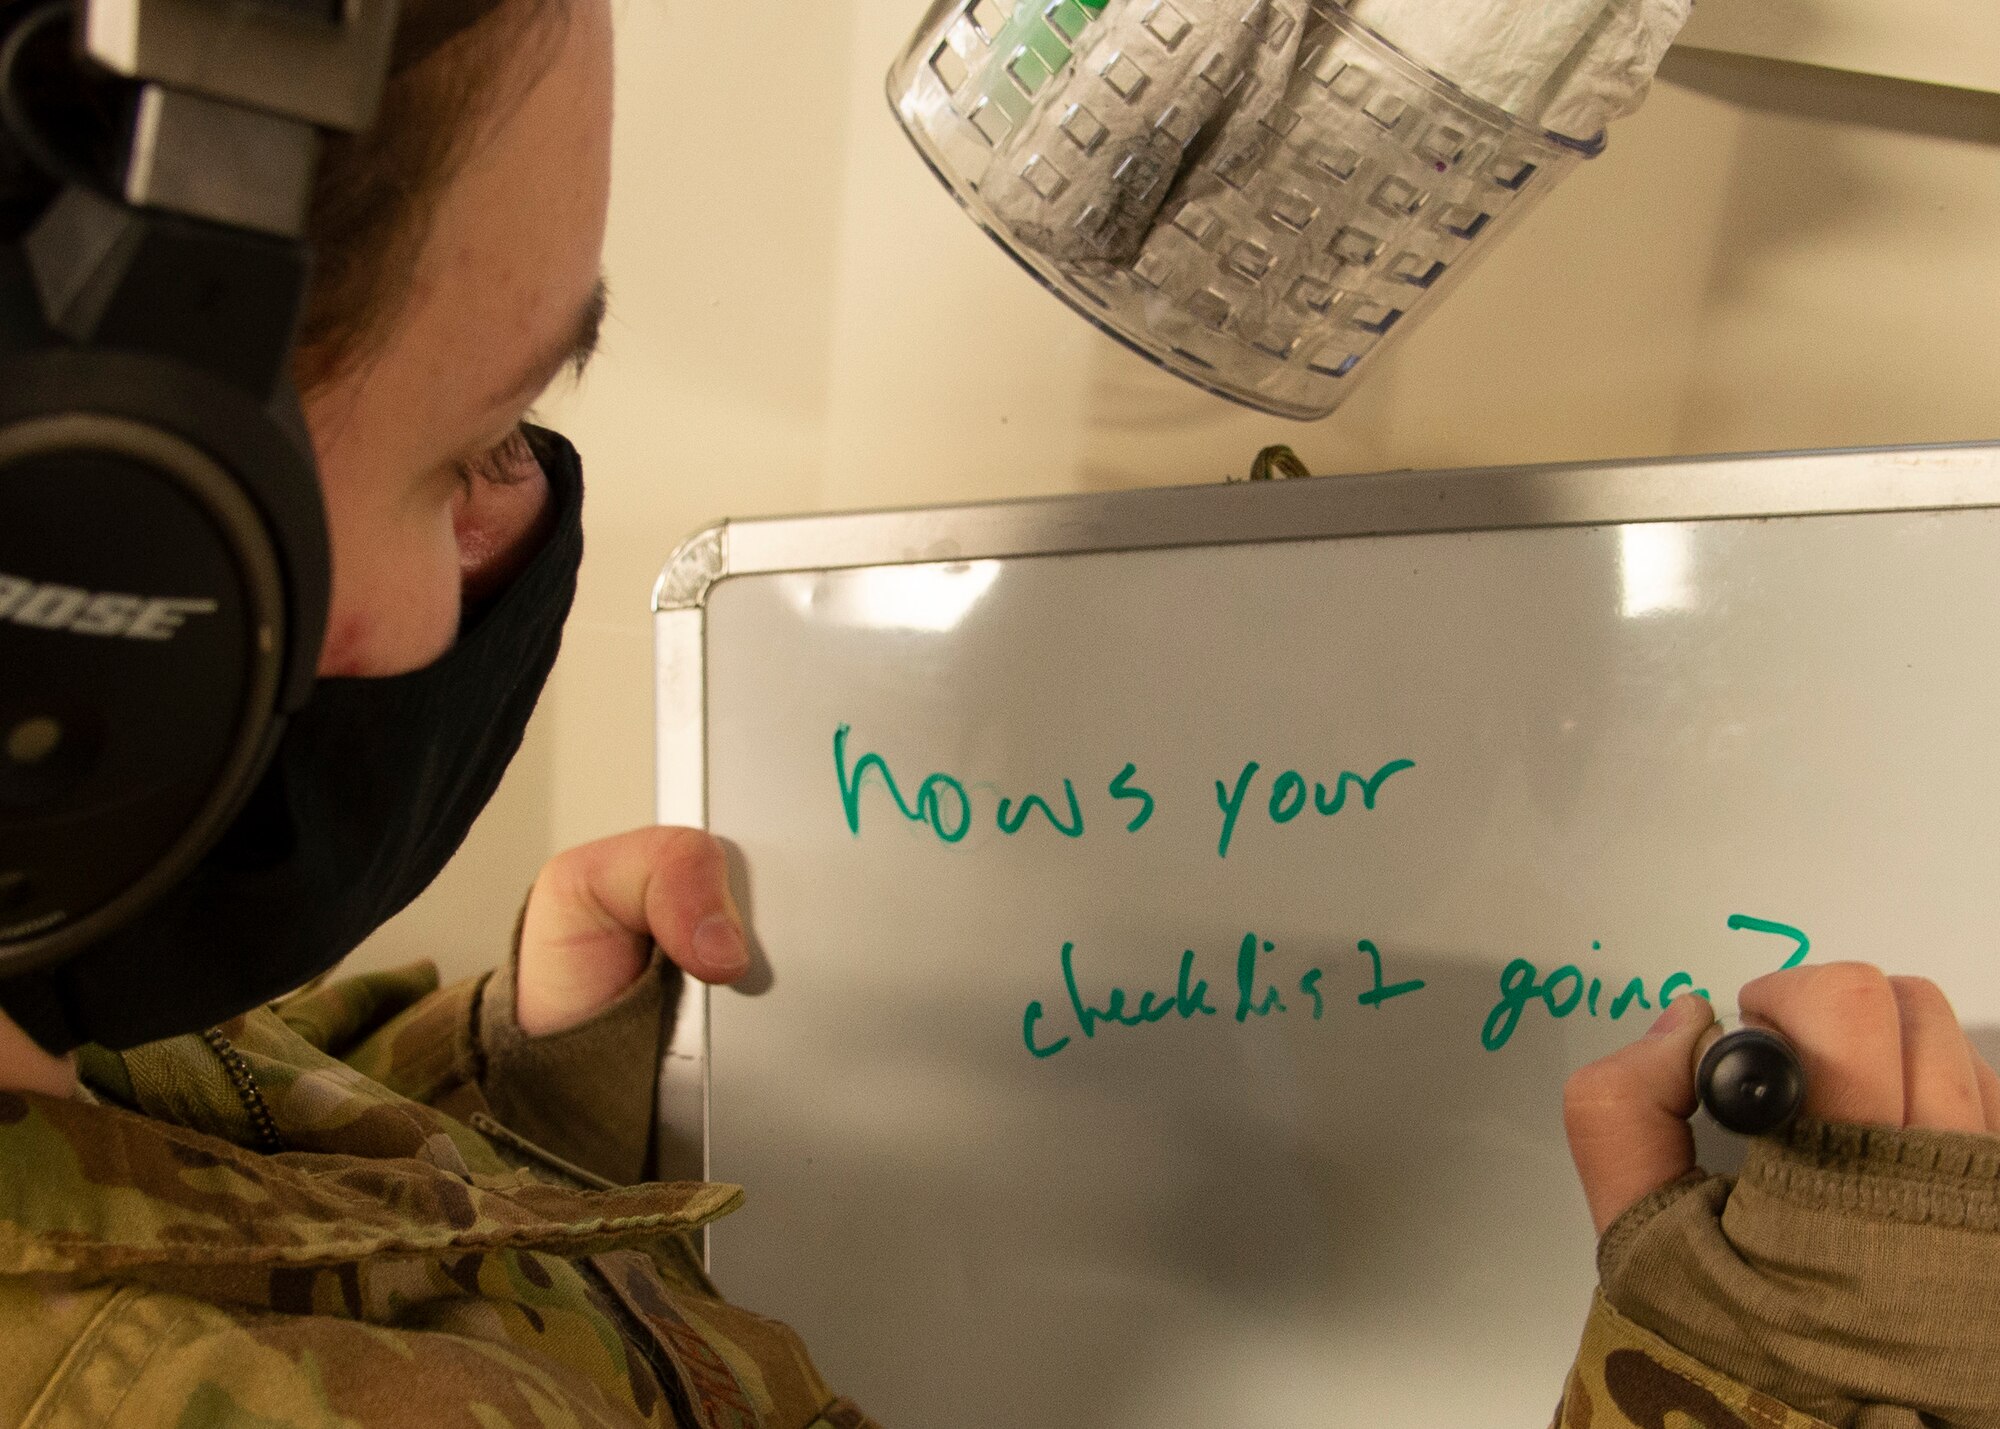 U.S. Air Force Staff Sgt. Rileigh Schickel, 10th Expeditionary Aeromedical Evacuation Flight aeromedical evacuation technician, writes a message on a whiteboard during a training at Ramstein Air Base, Germany, Jan. 26, 2021.